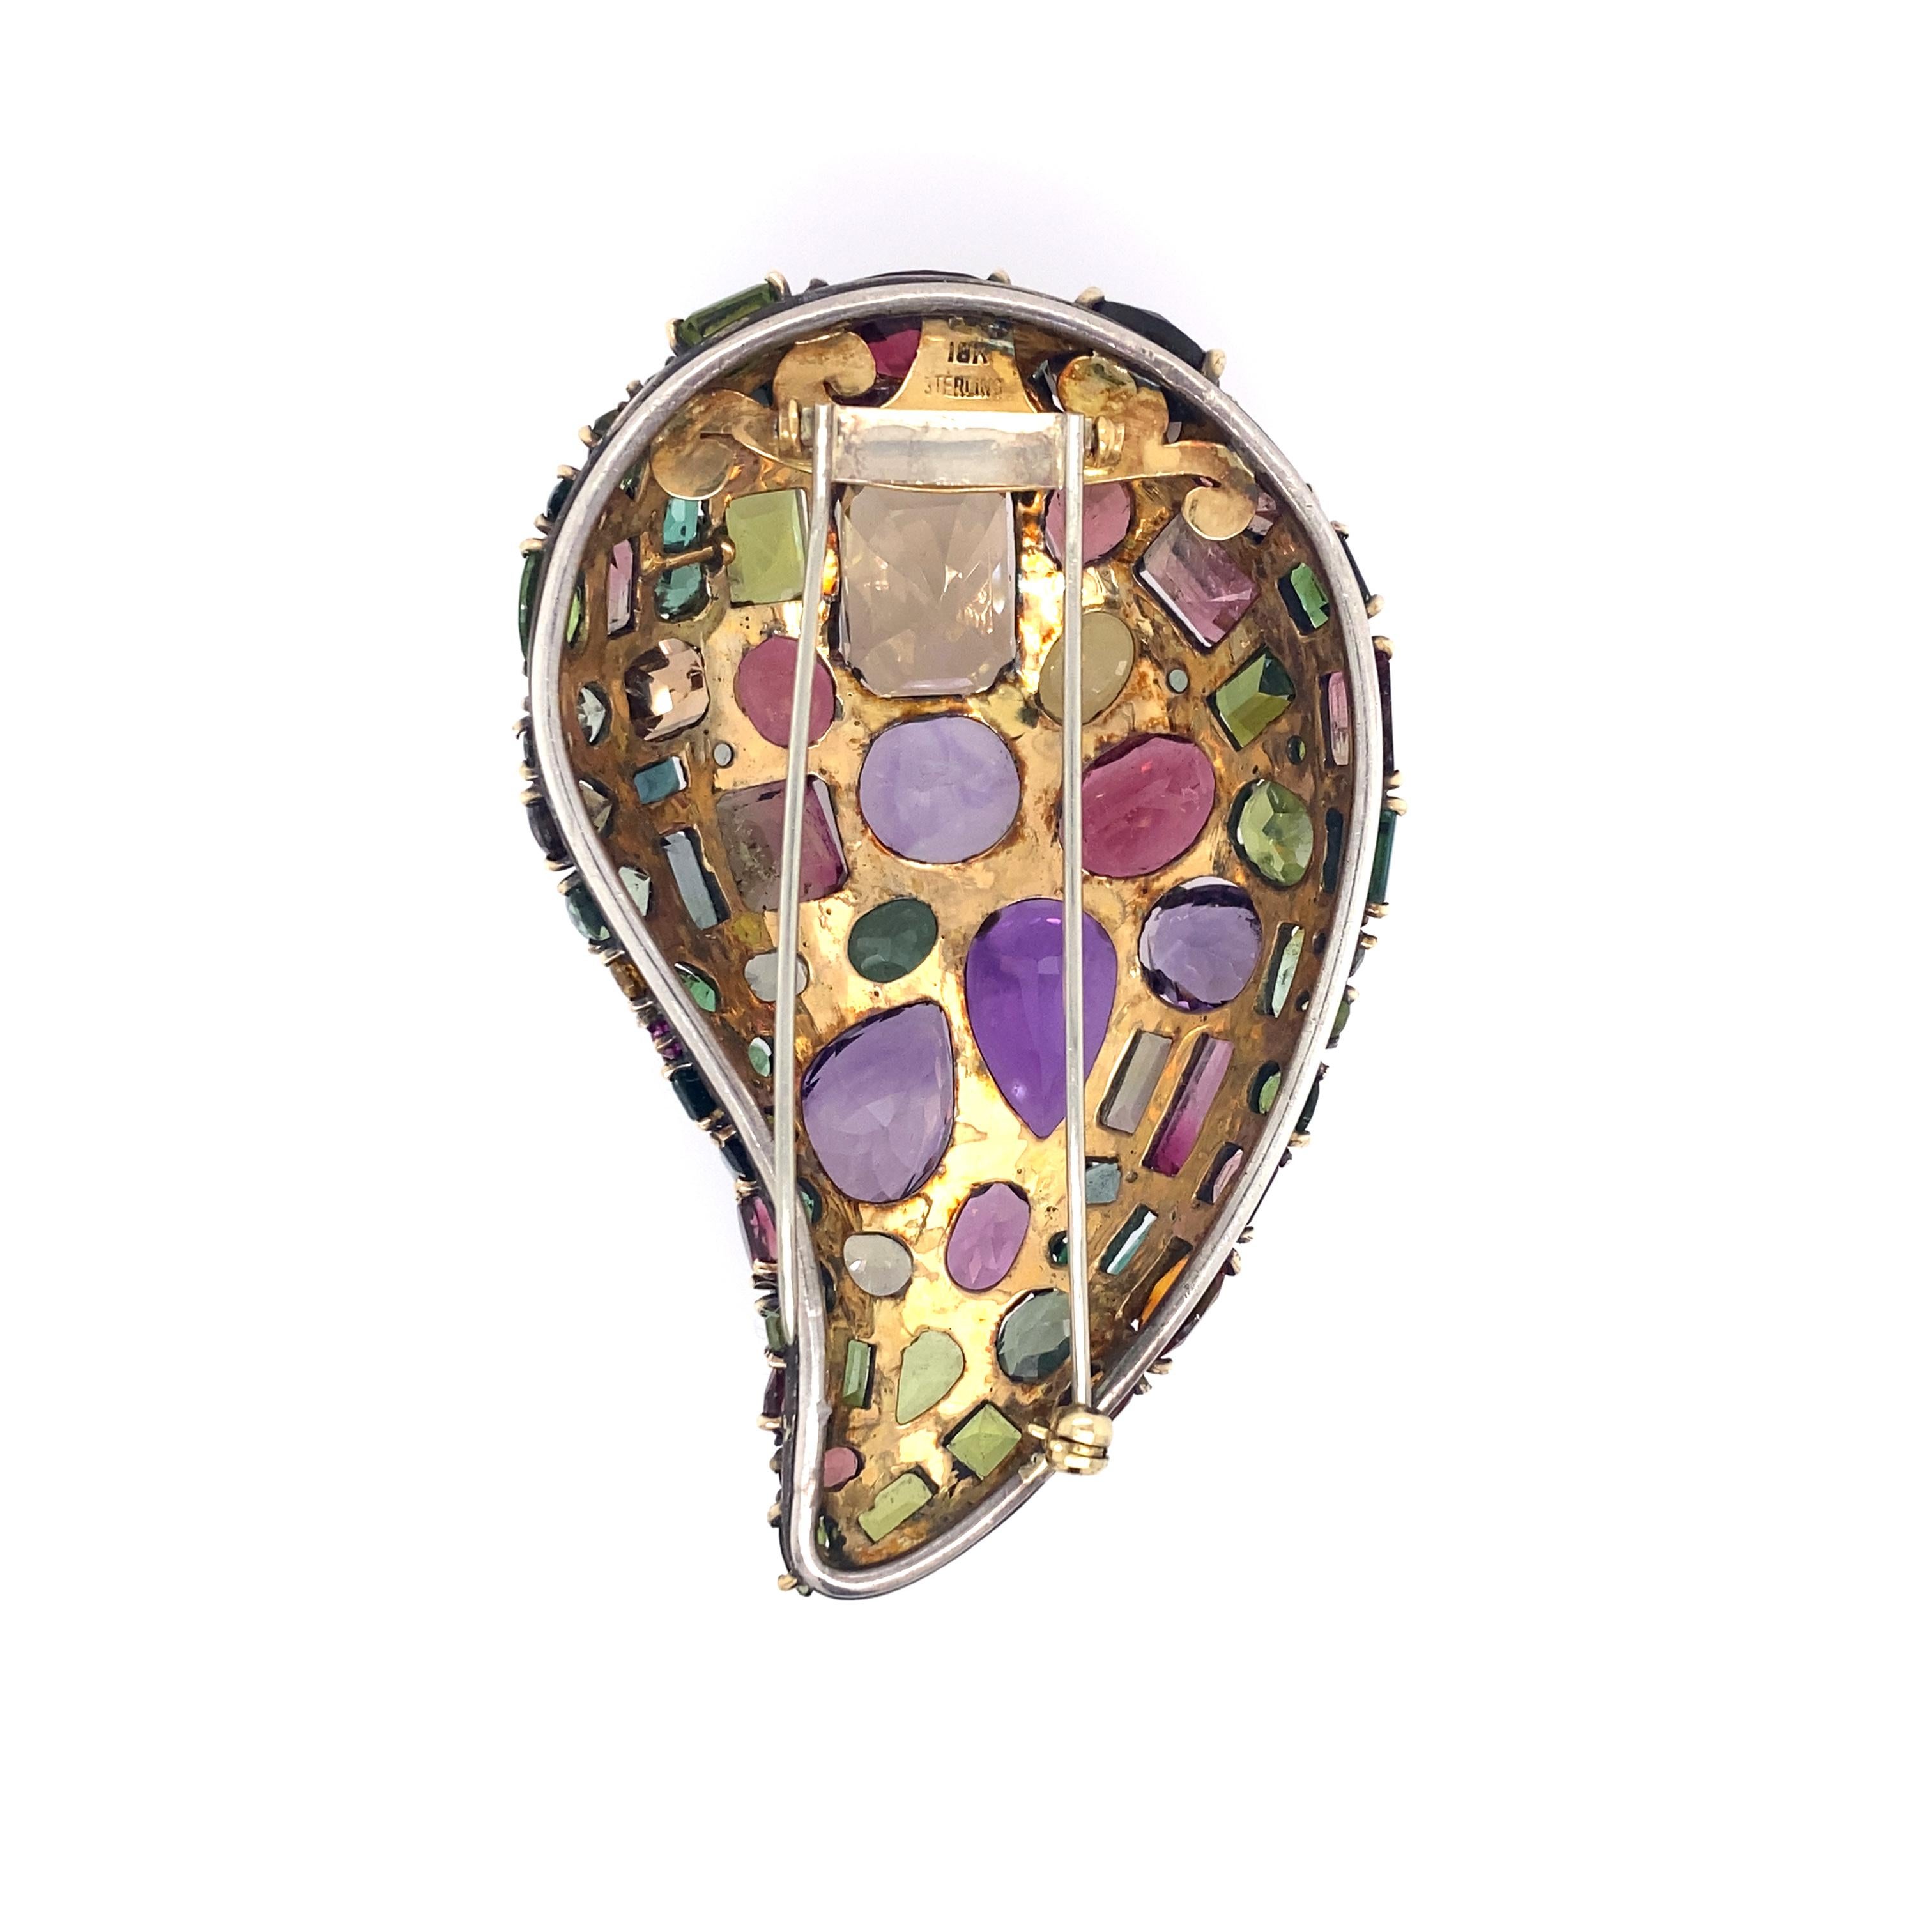 Marilyn Cooperman Gem Set Brooch  18k yellow gold/sterling silver, The brooch contains  various cuts of amethysts, citrines, tourmalines, aquamarines, peridots and emeralds weighing approximately 55 carats in total, stamped 